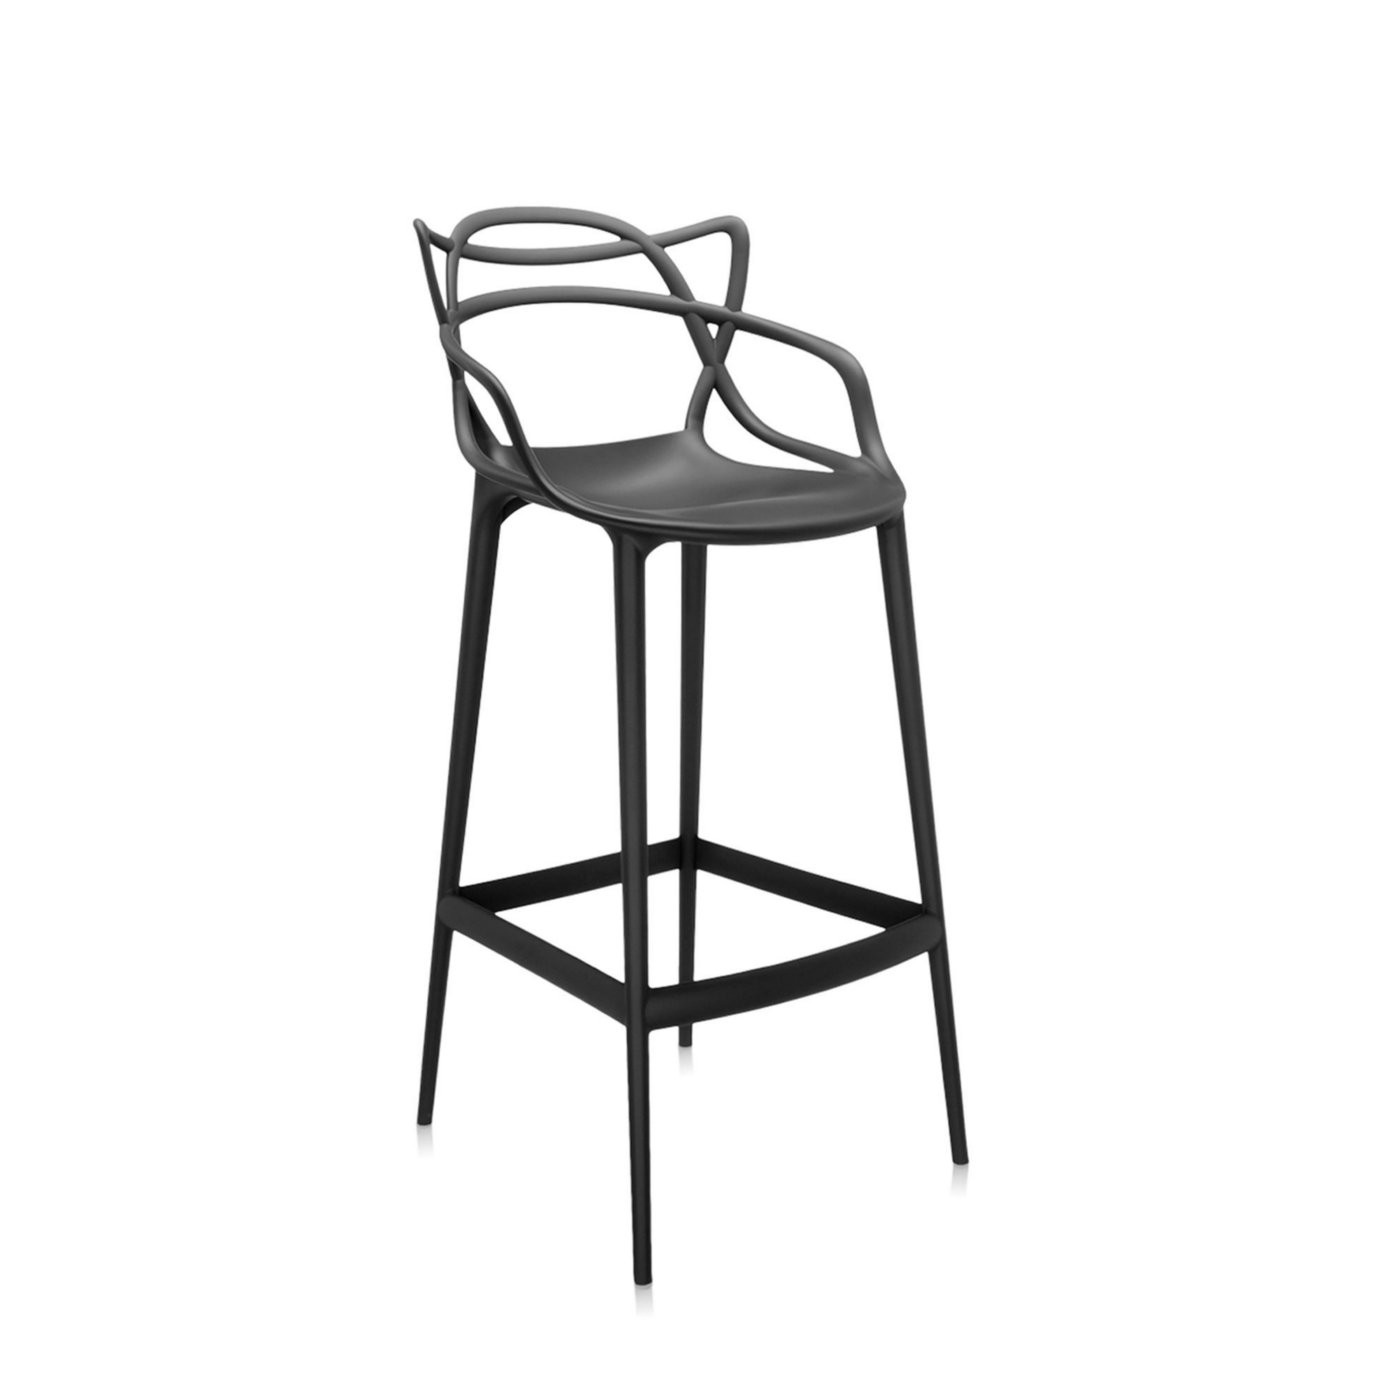 Kartell Masters 5868 At Nostraforma, Kartell Masters Bar Stool Review